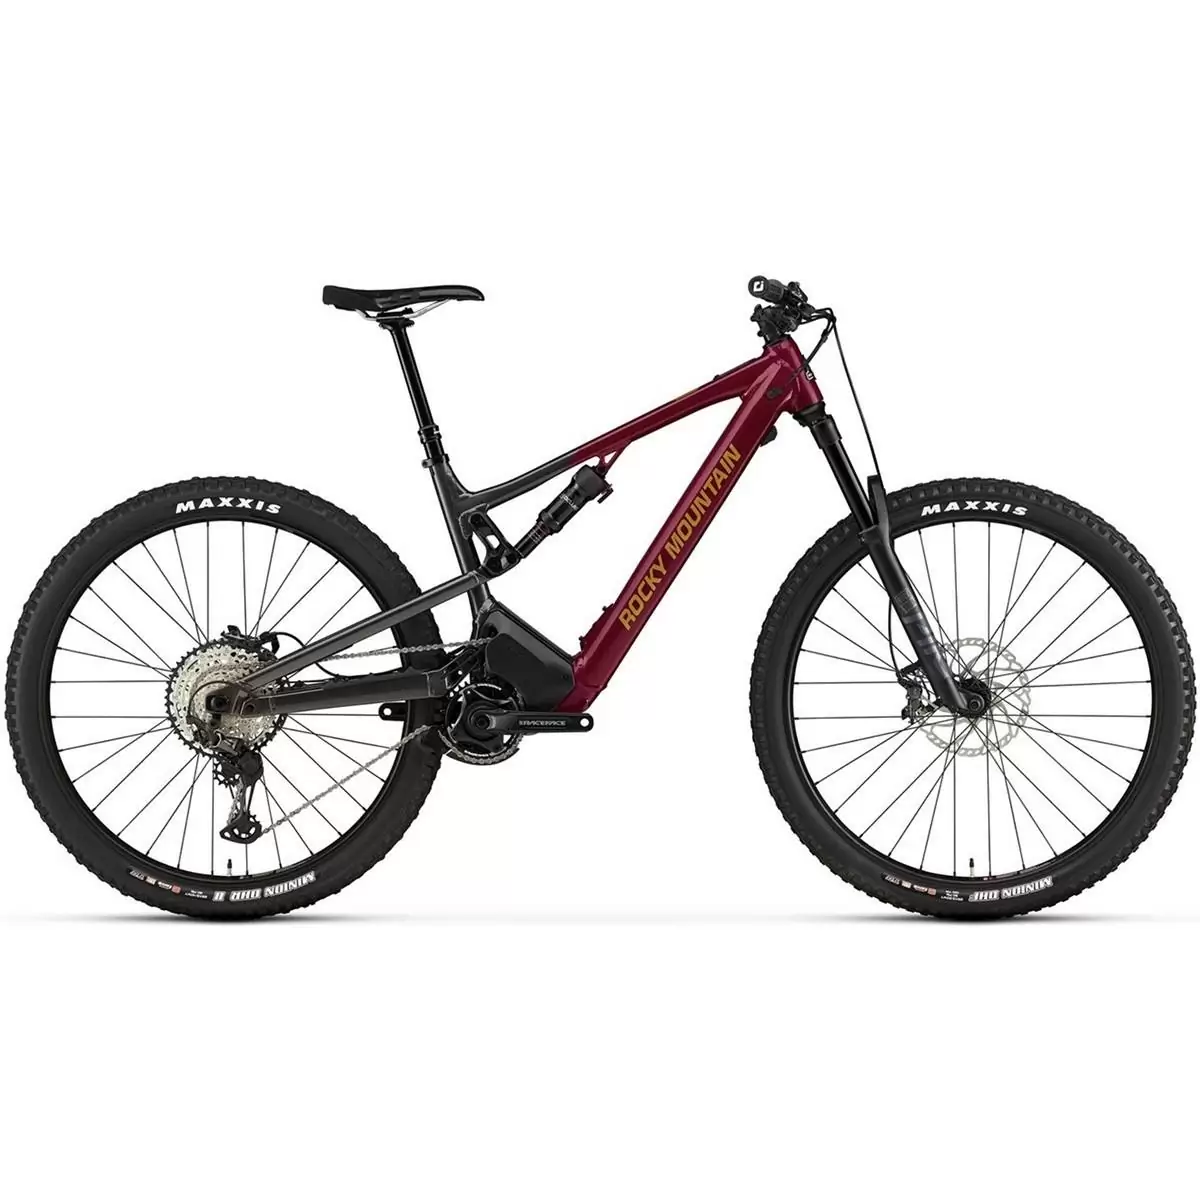 Instinct PowerPlay Alloy 70 29'' 150mm 12s 720Wh Grey/Red 2022 Size S - image